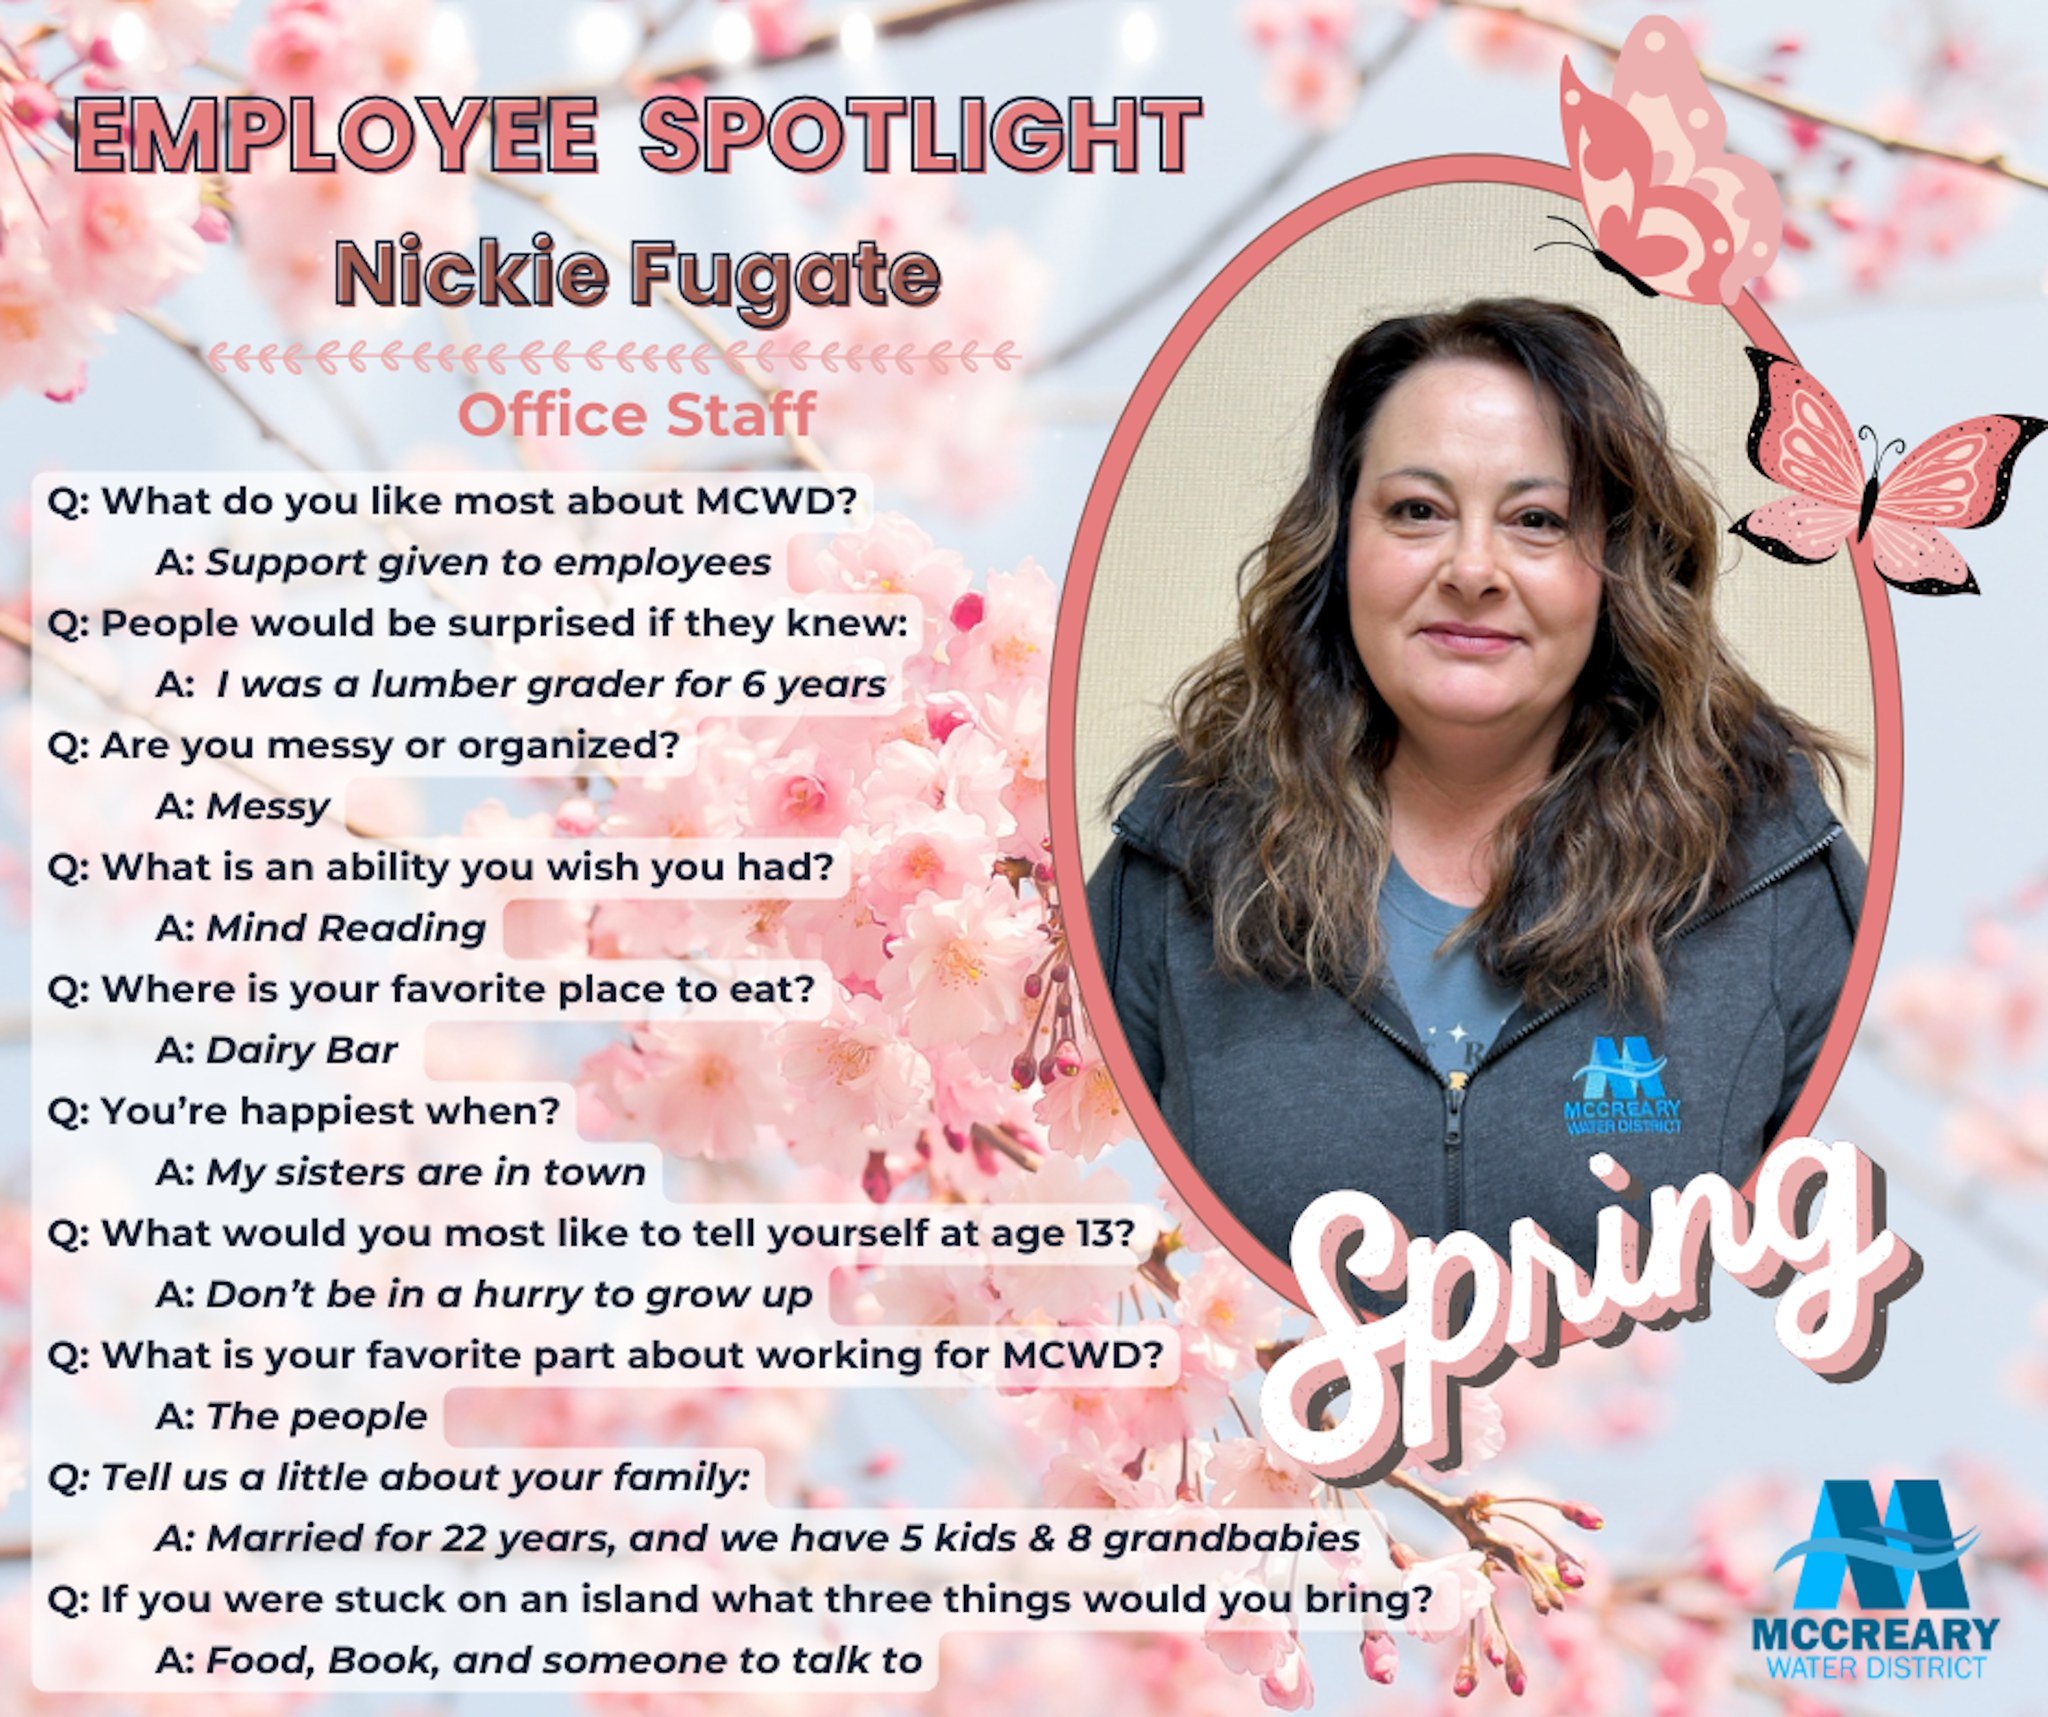 ⭐ Employee Spotlight ⭐

Nickie Fugate joined us early this year and she is a part of the office staff!